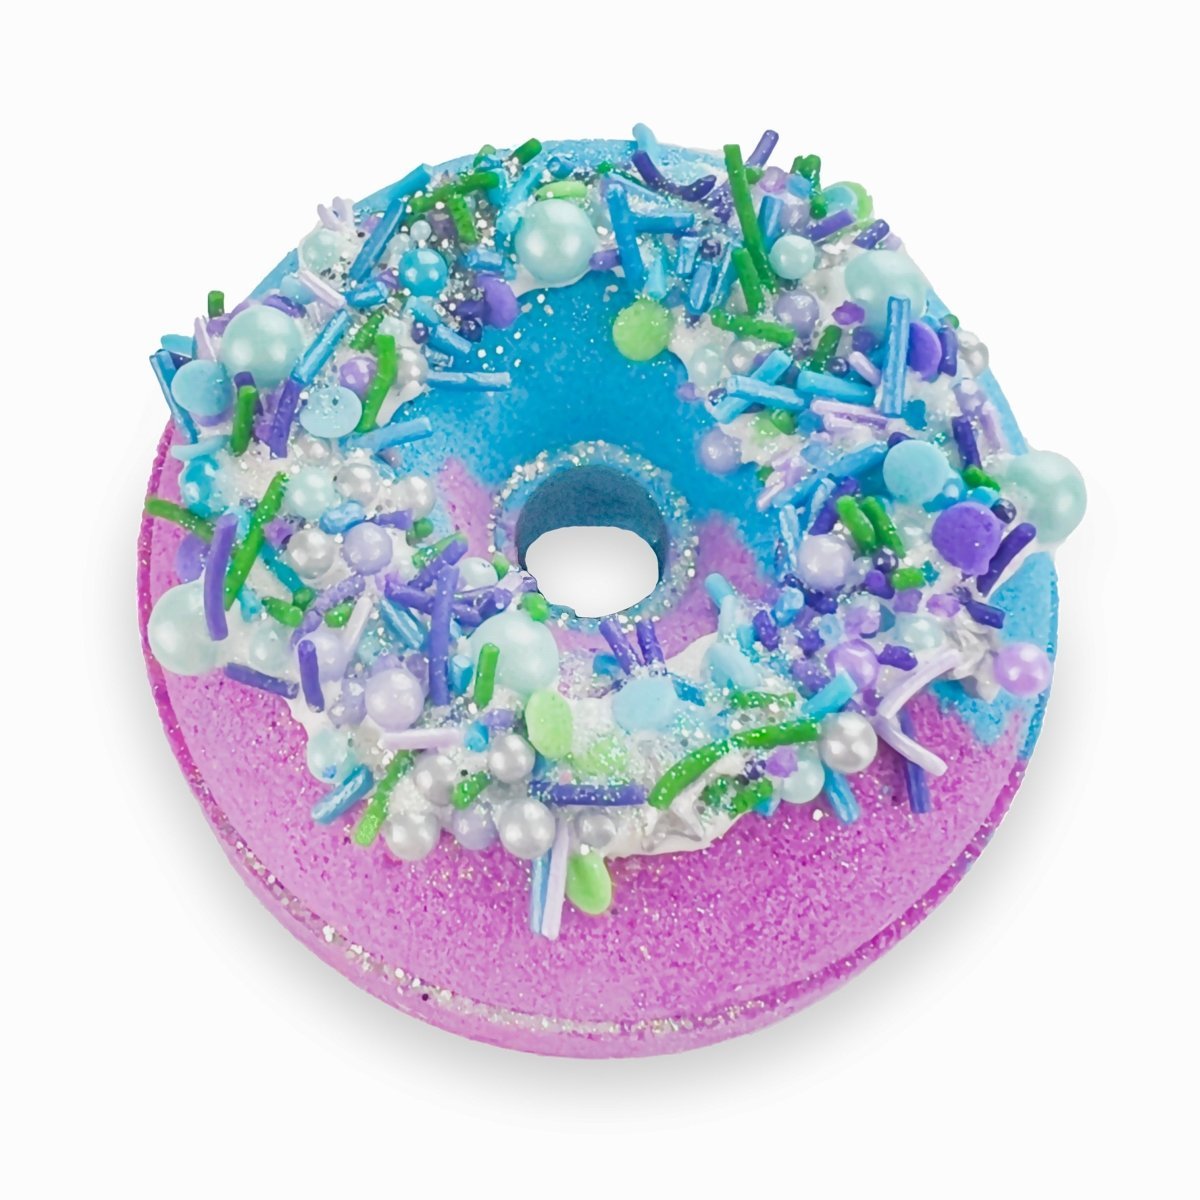 Blackcurrant Donut Bath Bomb for Kids & Adults - Colourful With Sprinkles & Fruit Fragrance - Made in Australia by Bath Box